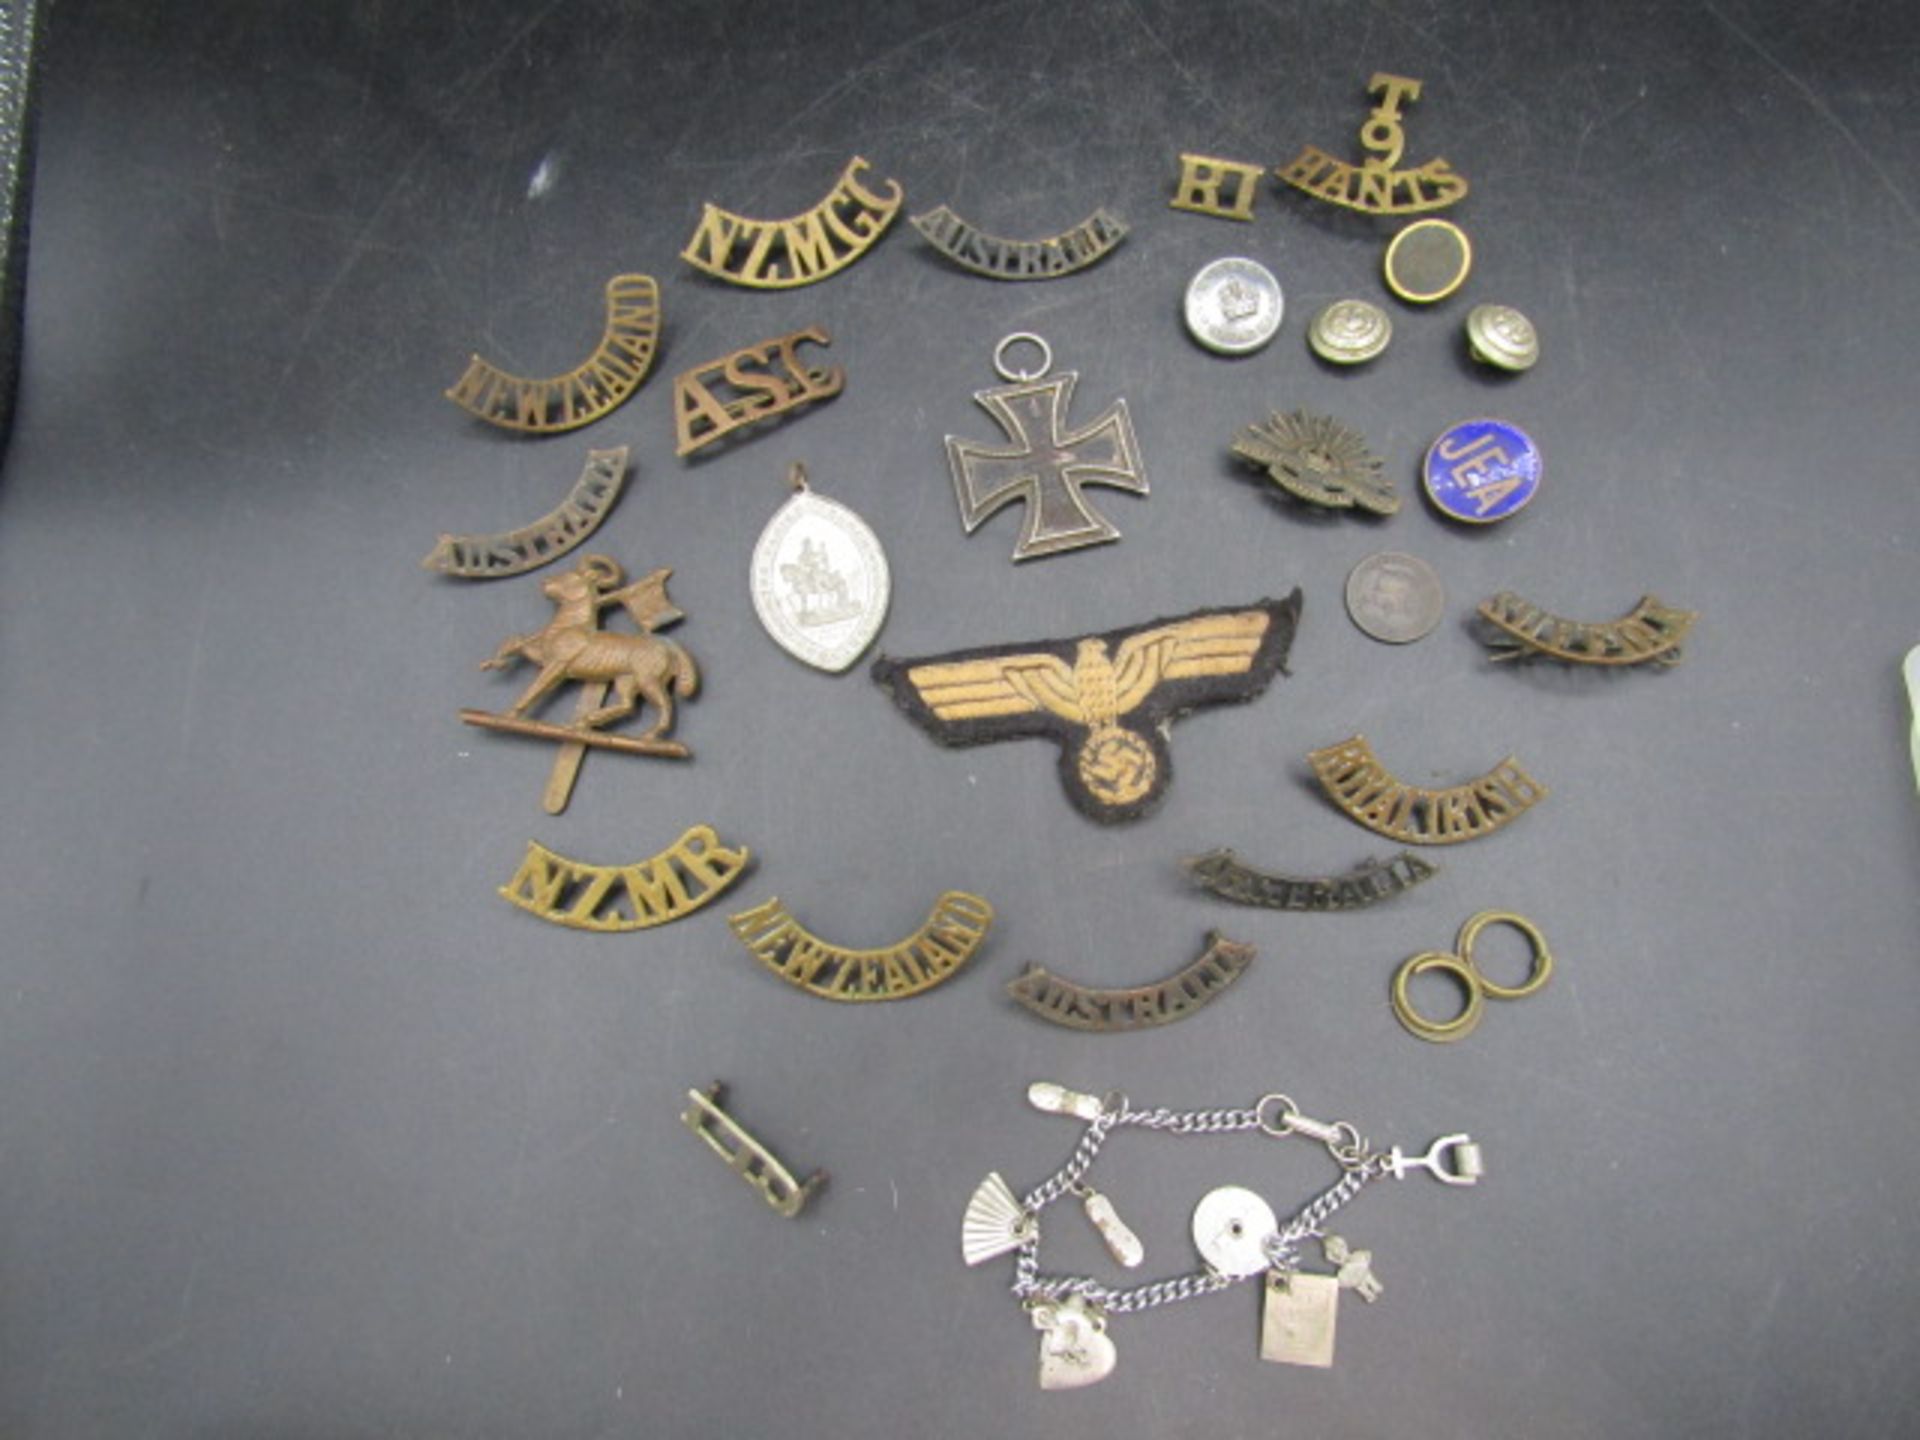 WW2 iron cross and various insignia badges and patches plus a charm bracelet